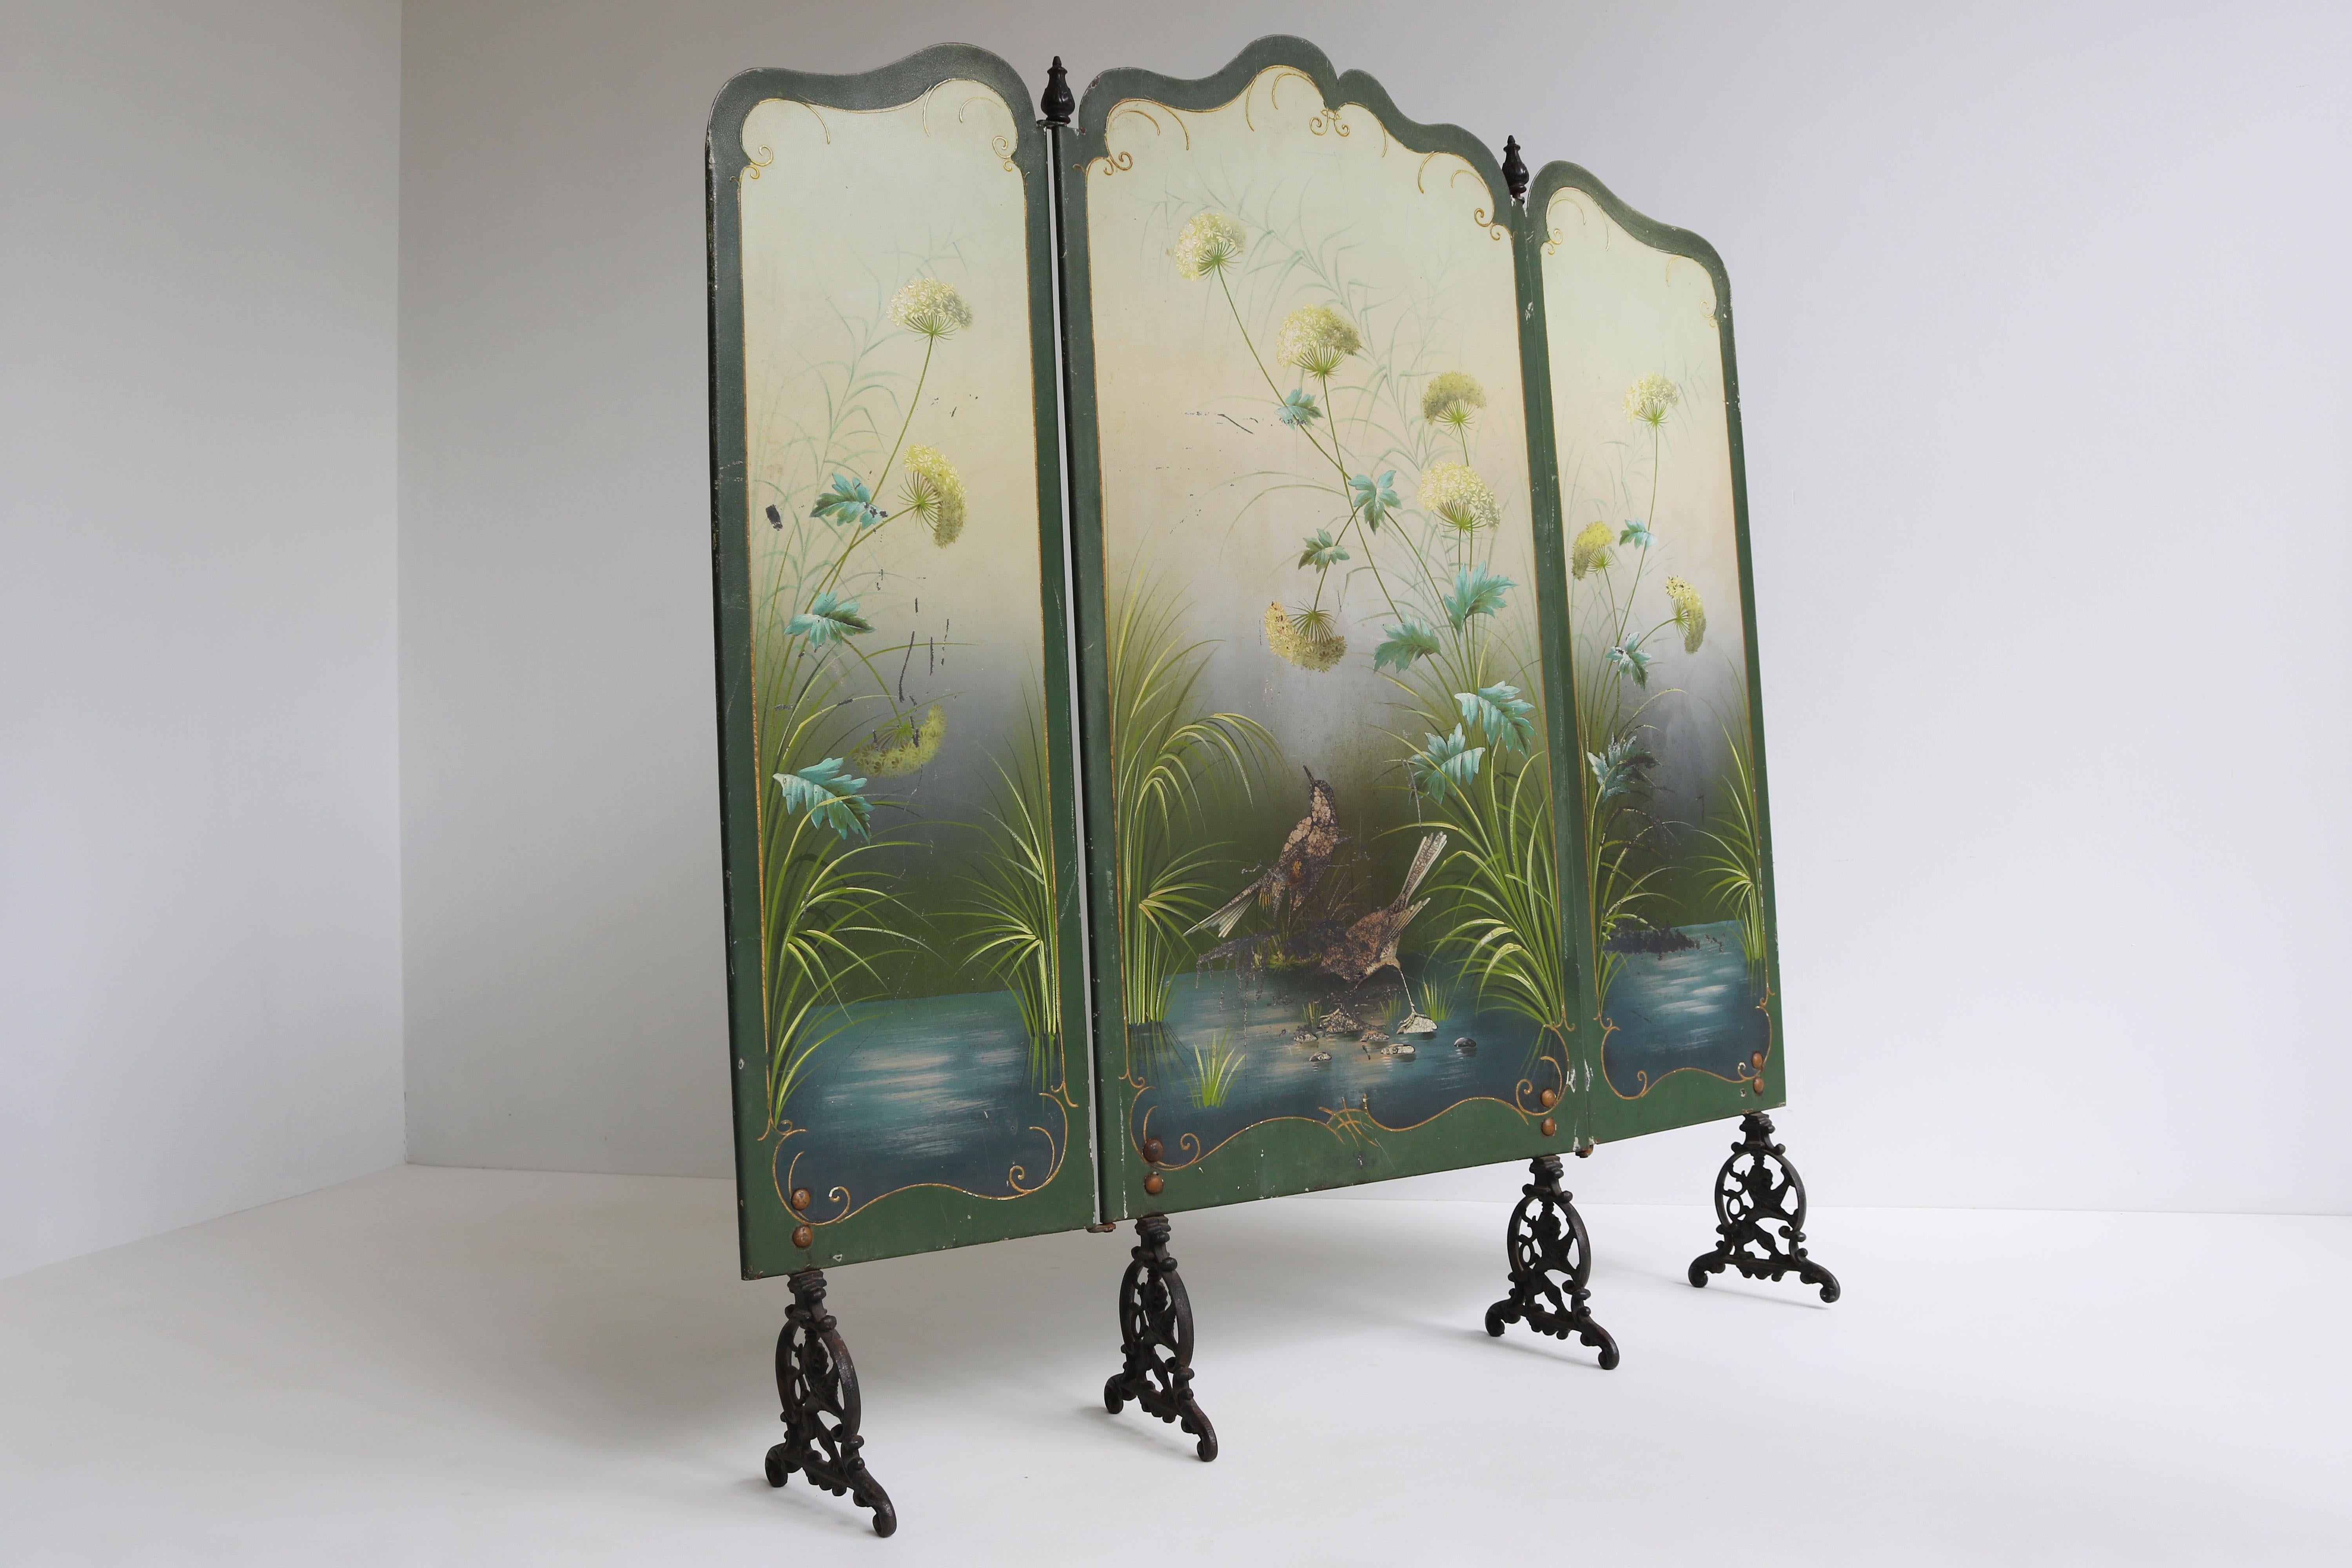 Decorative & Breathtaking! This hand painted art nouveau fire screen from france 1900. The screen is not just a screen but also a piece of art. Fully hand painted displaying a floral scene with a pair of birds at the waterfront. 
Through the heat